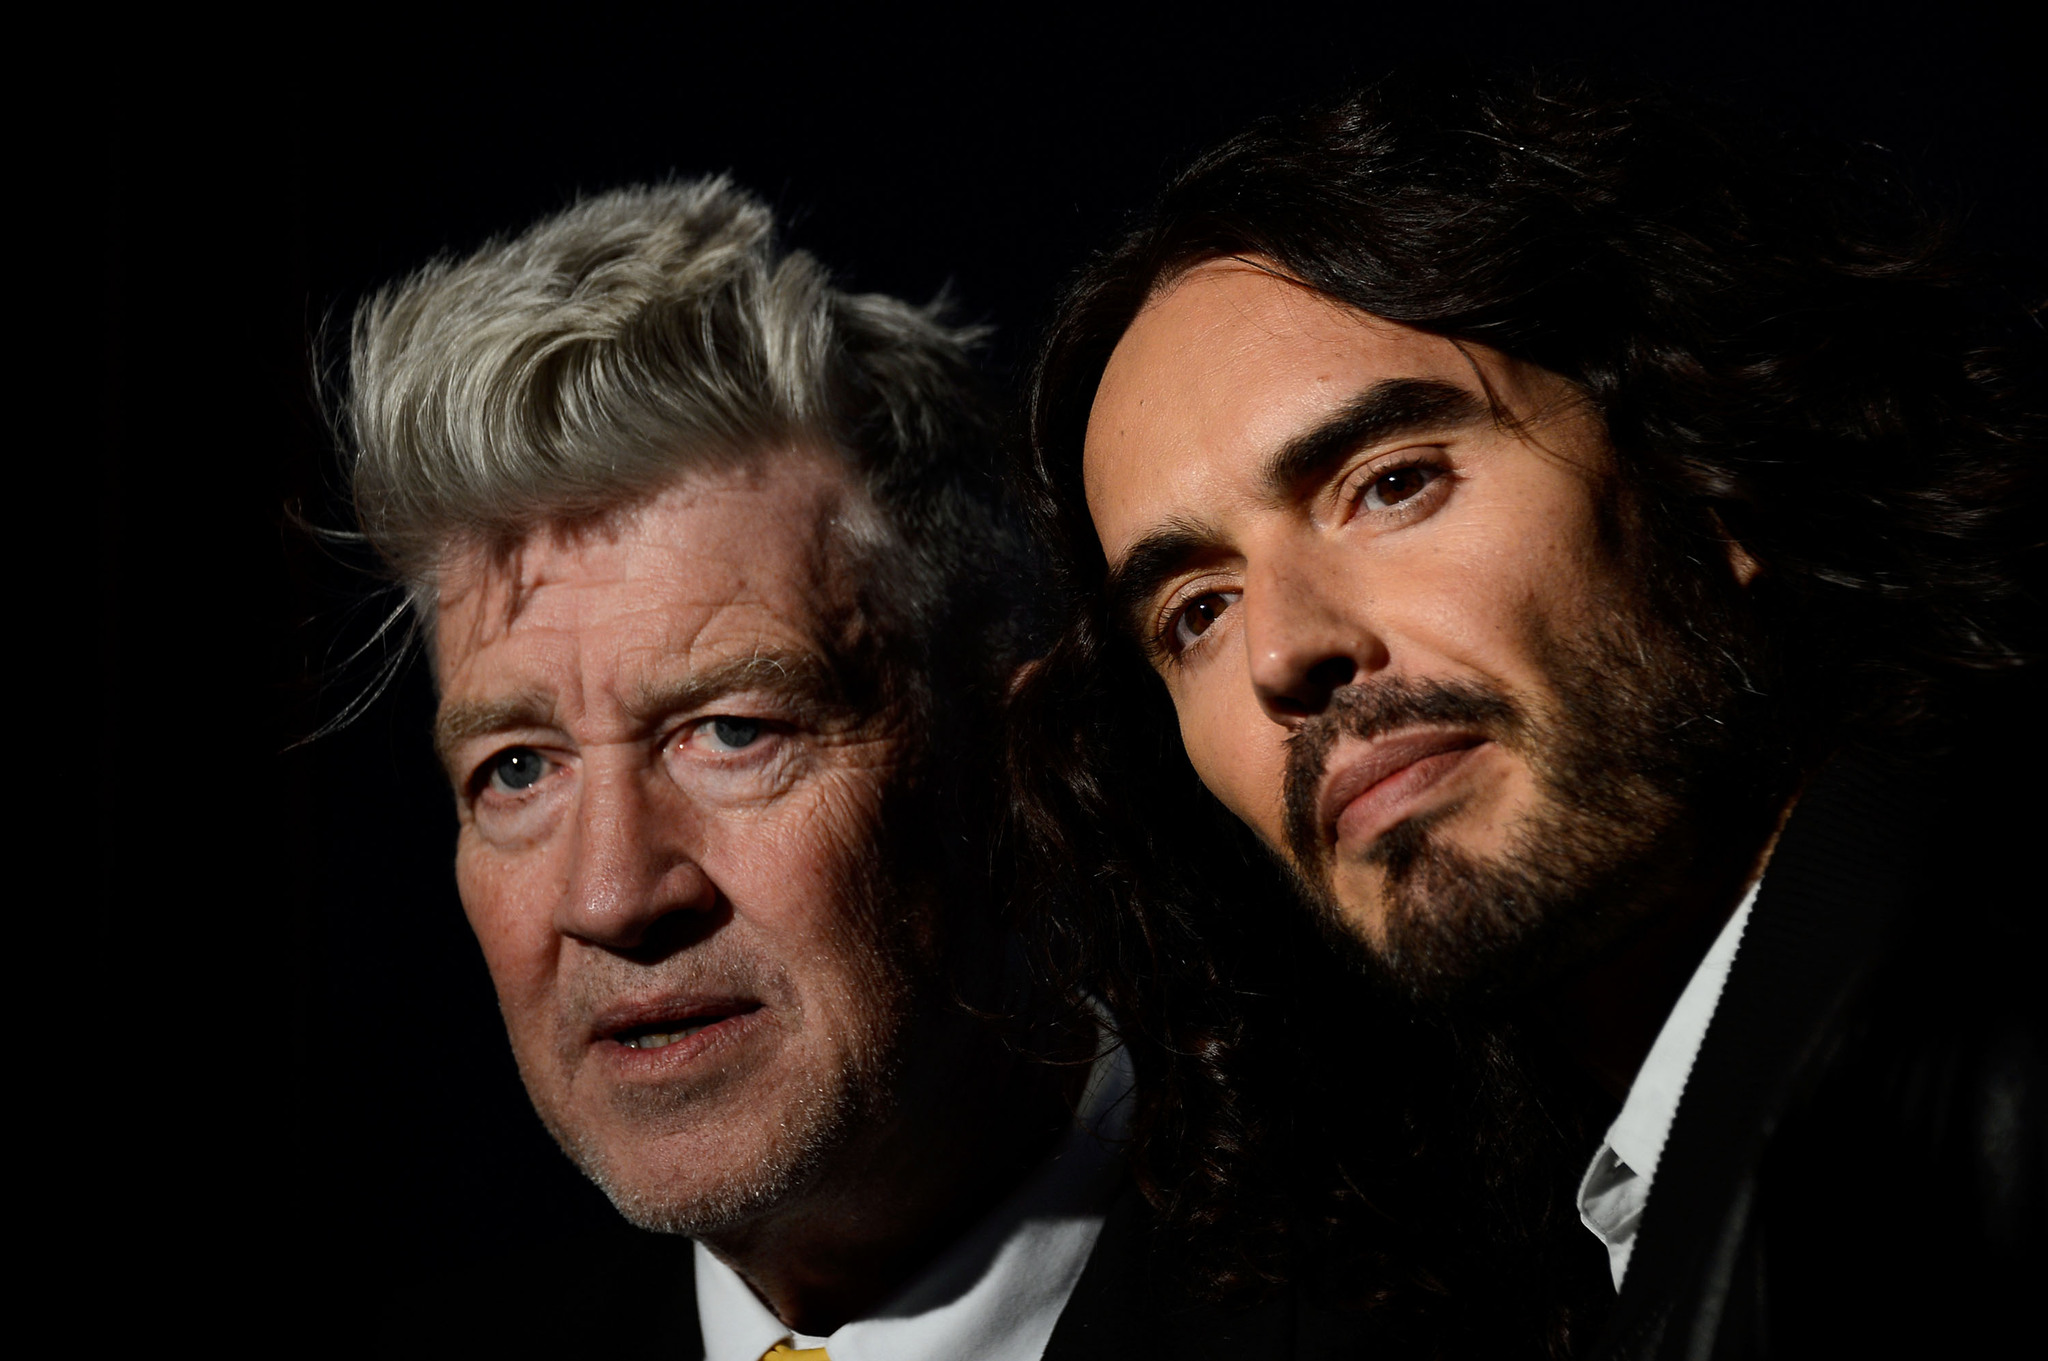 Founder/Director David Lynch and comedian Russell Brand attend the 